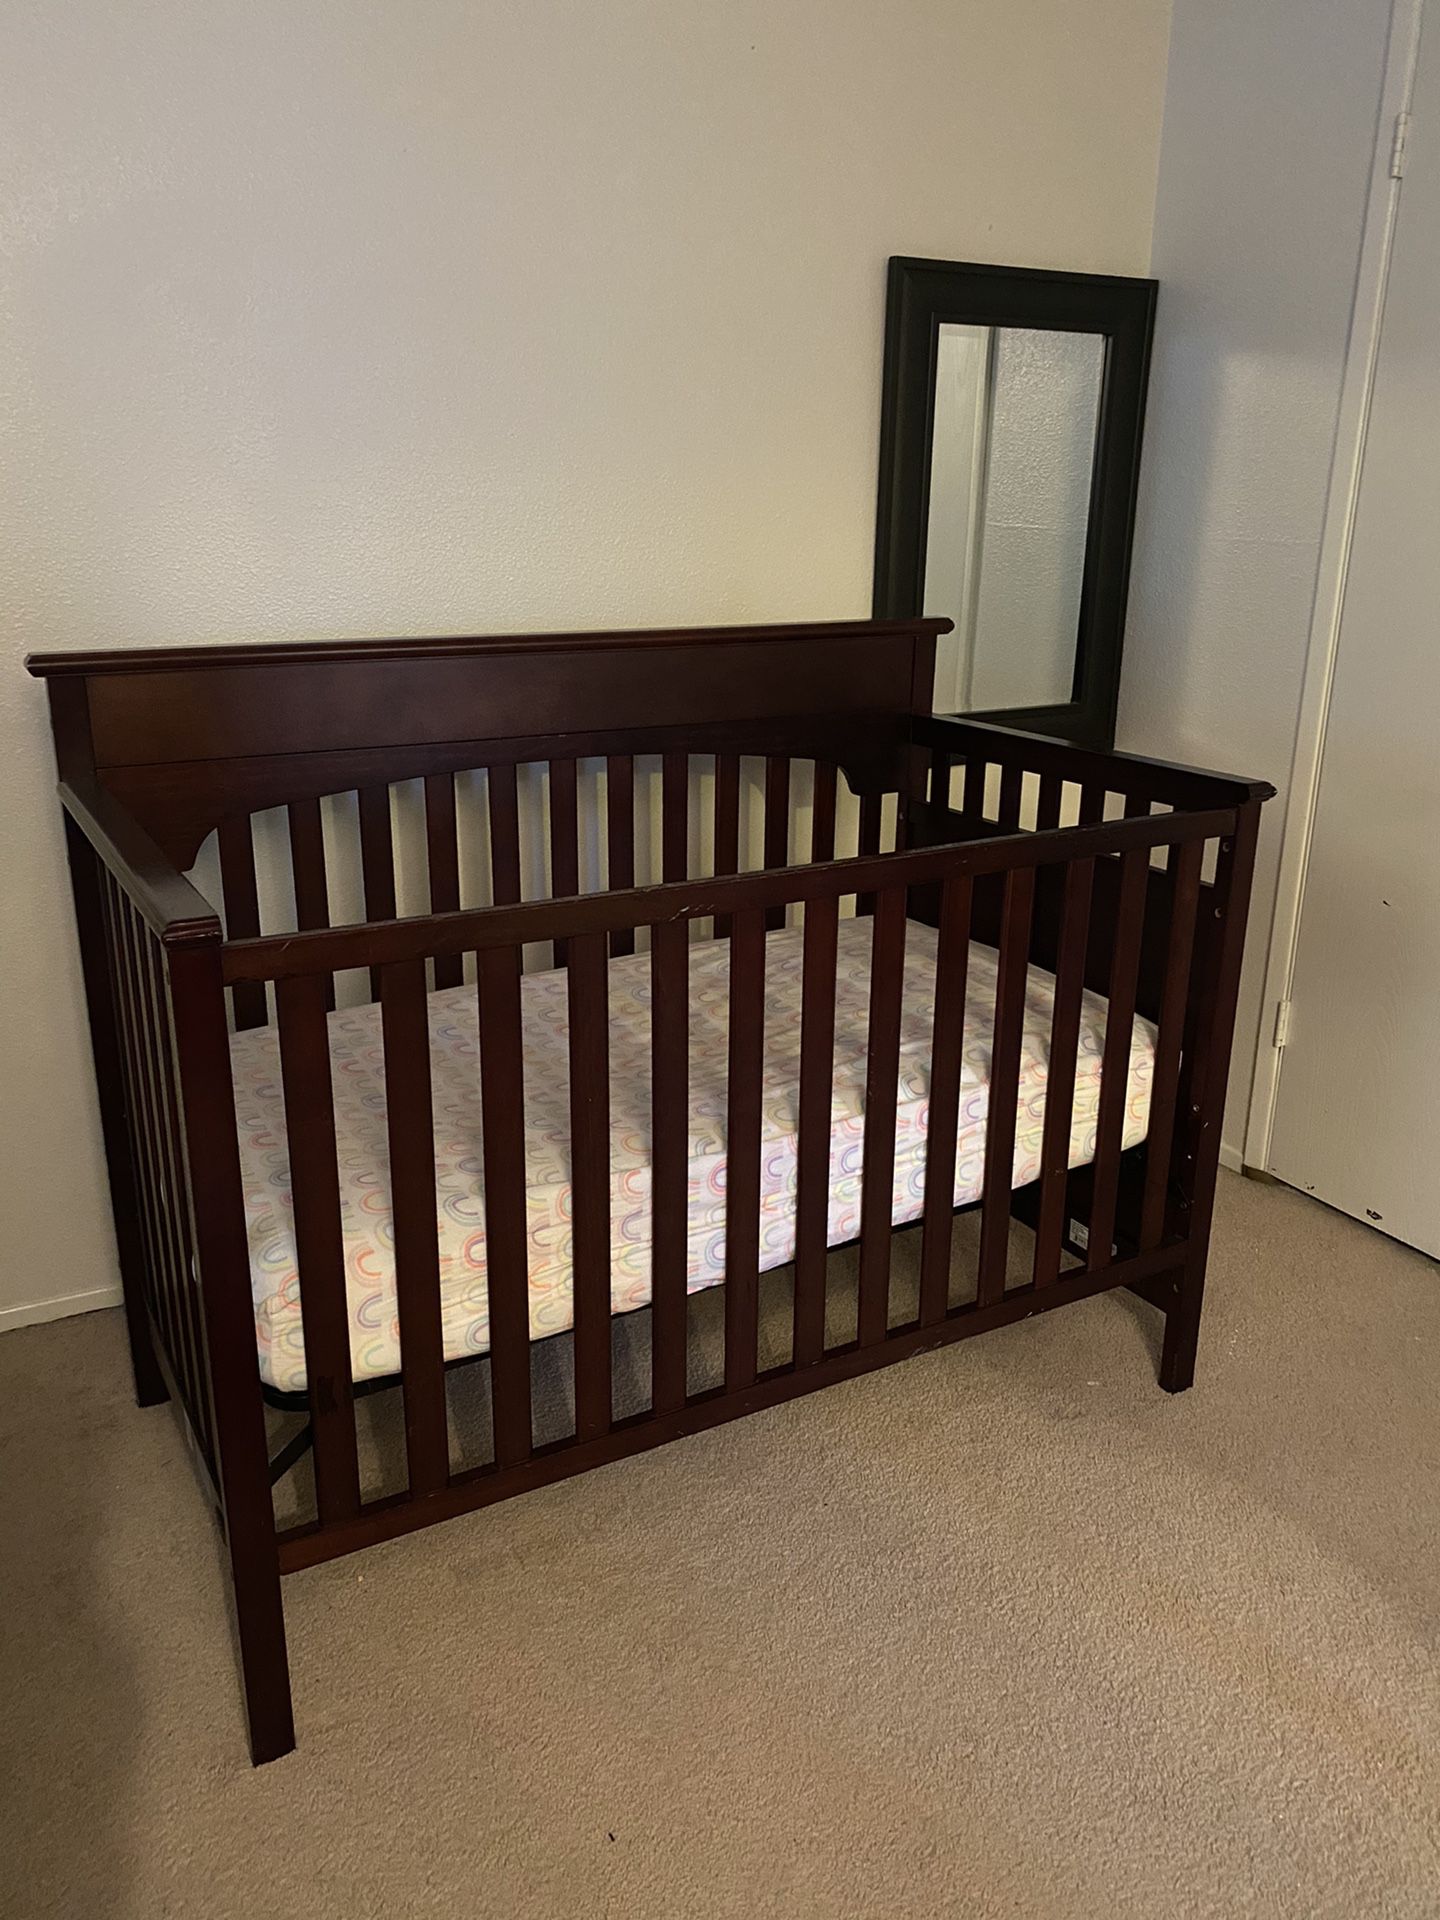 4 n 1 Graco crib with changing table